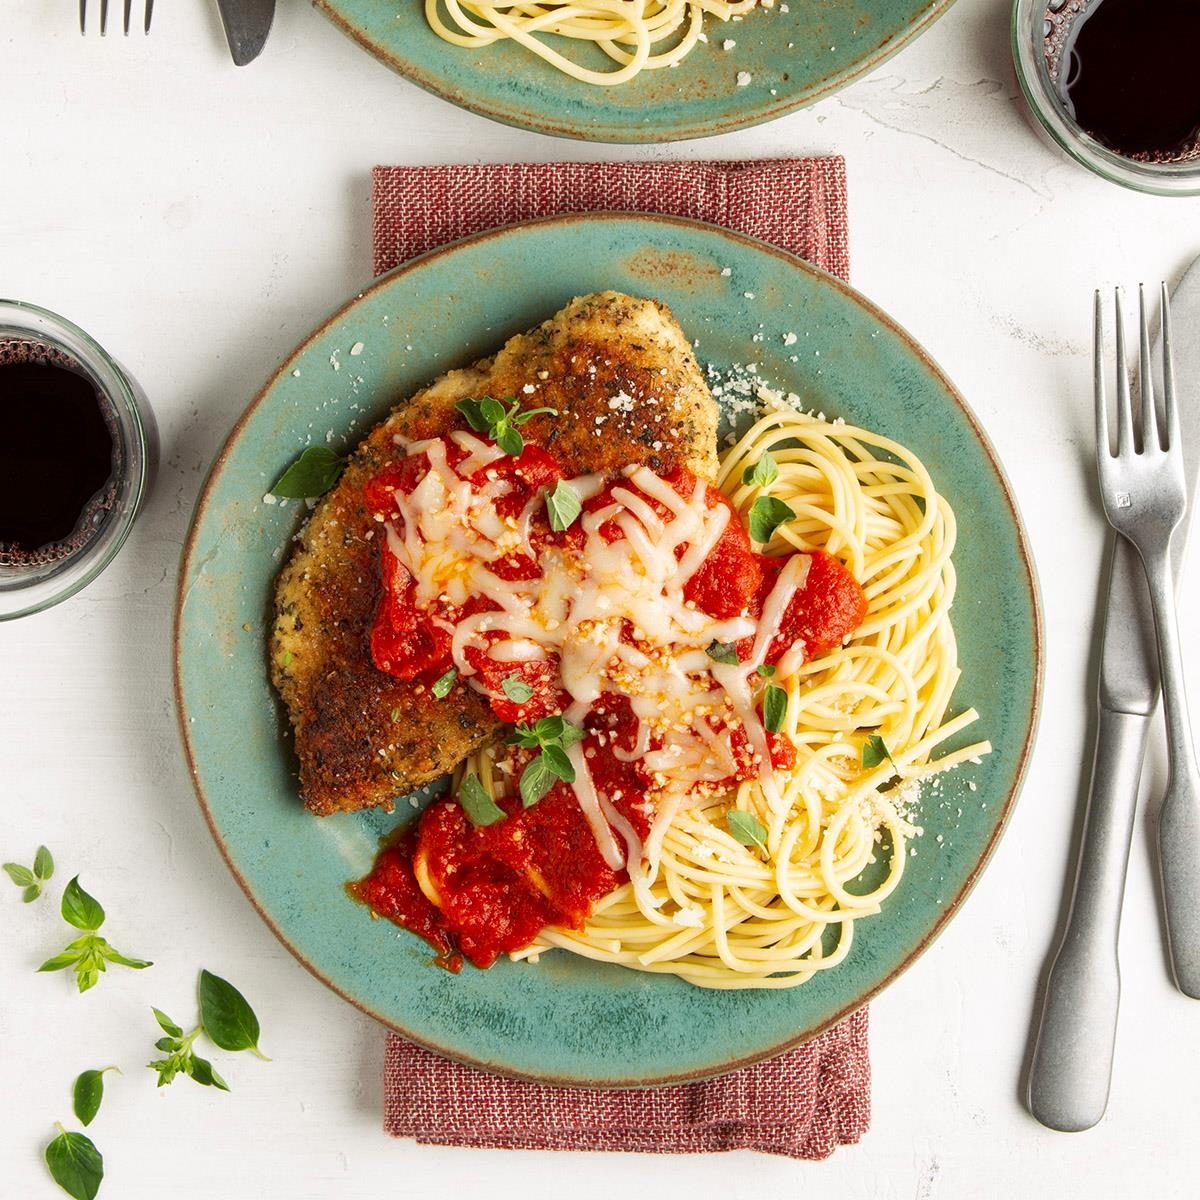 <p>I like to make this yummy chicken Parmesan with spaghetti when I have extra sauce on hand. The herbed coating on the tender chicken gets nice and golden. —Margie Eddy, Ann Arbor, Michigan. If you're looking for more variations, then learn how to make <a href="https://www.tasteofhome.com/article/million-dollar-spaghetti/">million-dollar spaghetti</a>.</p> <div class="listicle-page__buttons"> <div class="listicle-page__cta-button"><a href='https://www.tasteofhome.com/recipes/spaghetti-chicken-parmesan/'>Go to Recipe</a></div> </div>